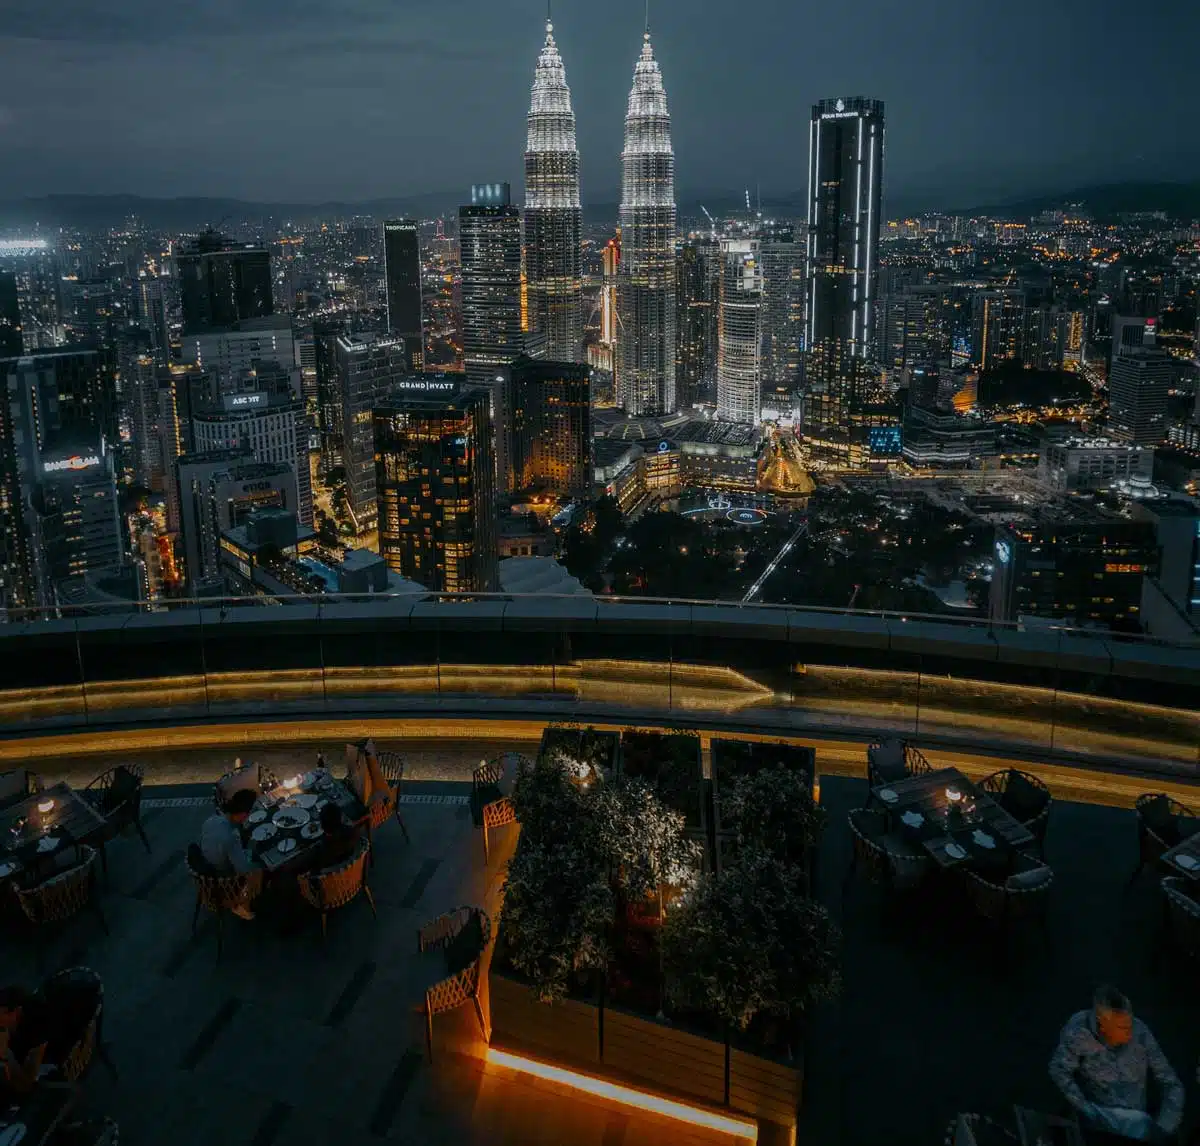 Here are some of the best places to eat in Kuala Lumpur